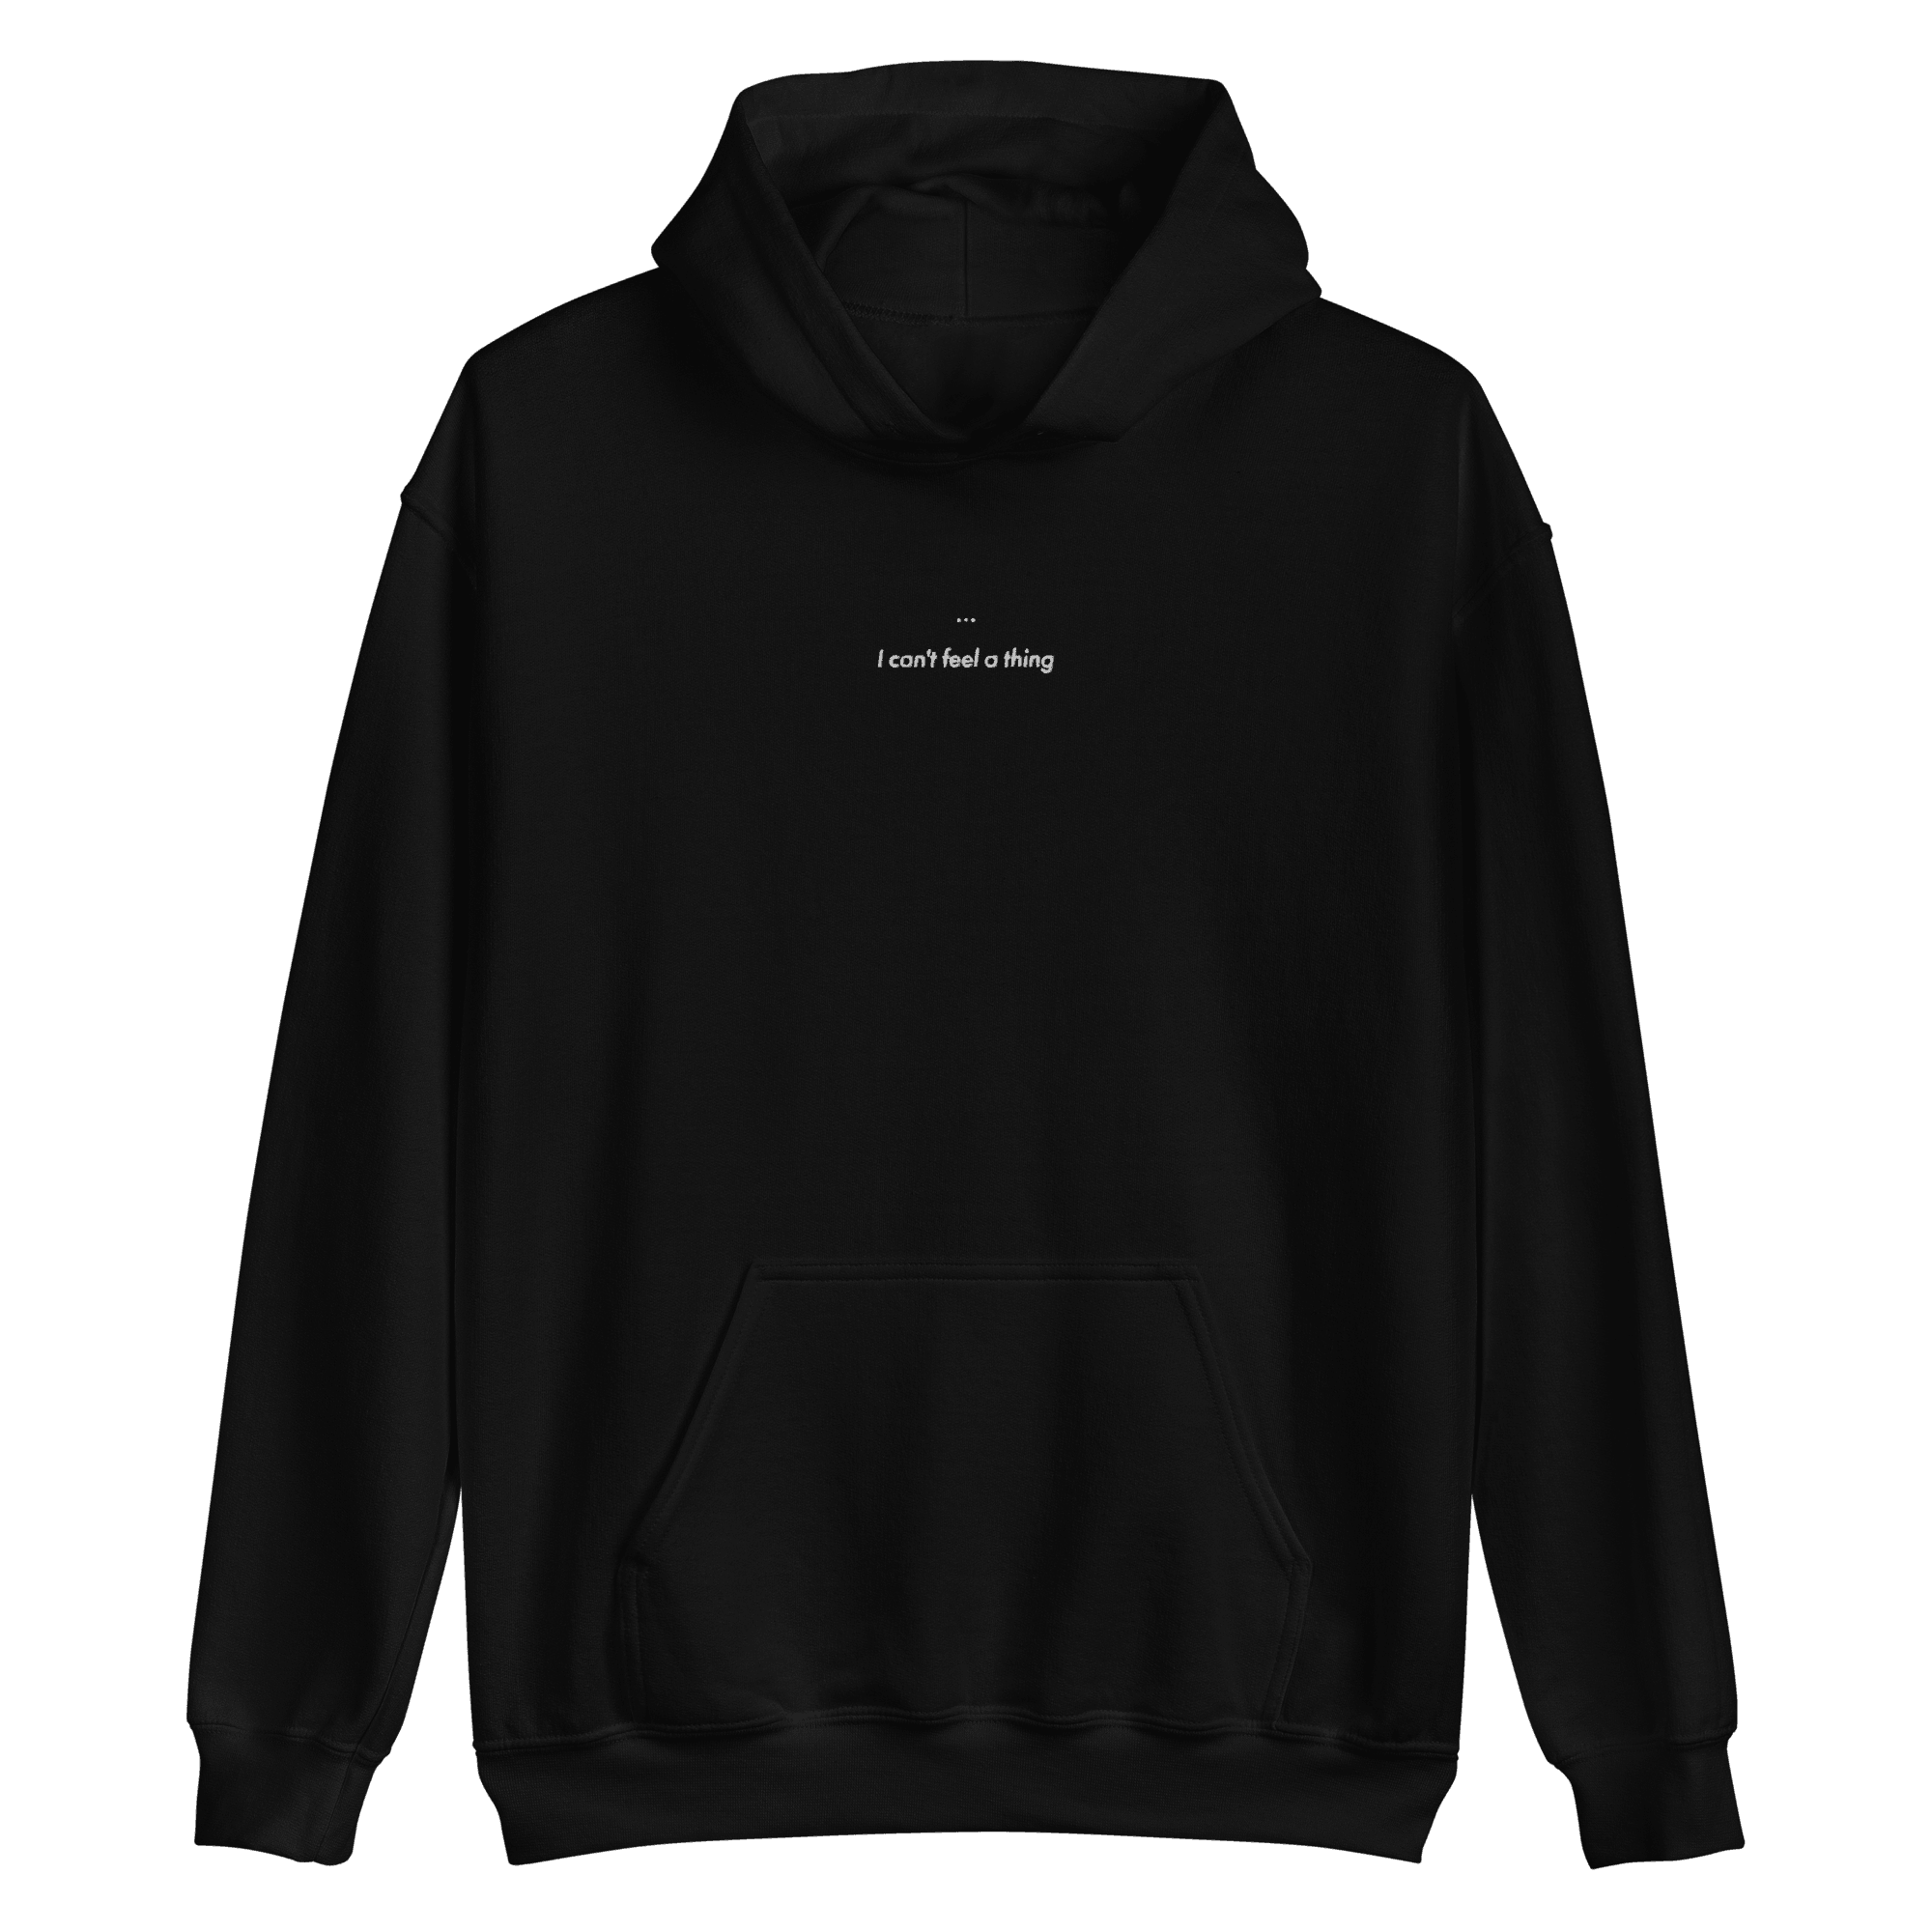 I can't feel a thing® Embroidered Hoodie (super limited) - Kikillo Club